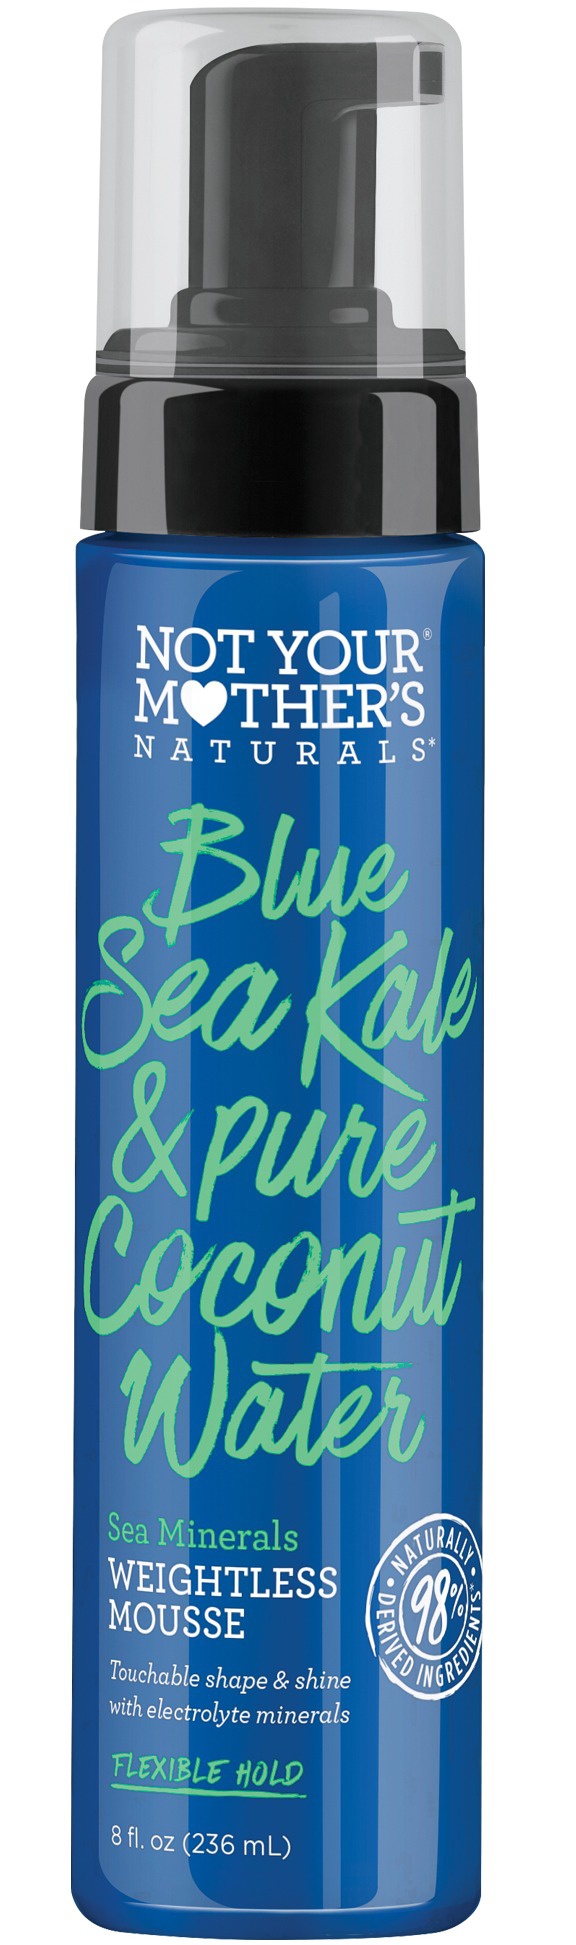 not your mother's Blue Sea Kale & Pure Coconut Water Sea Minerals Weightless Mousse